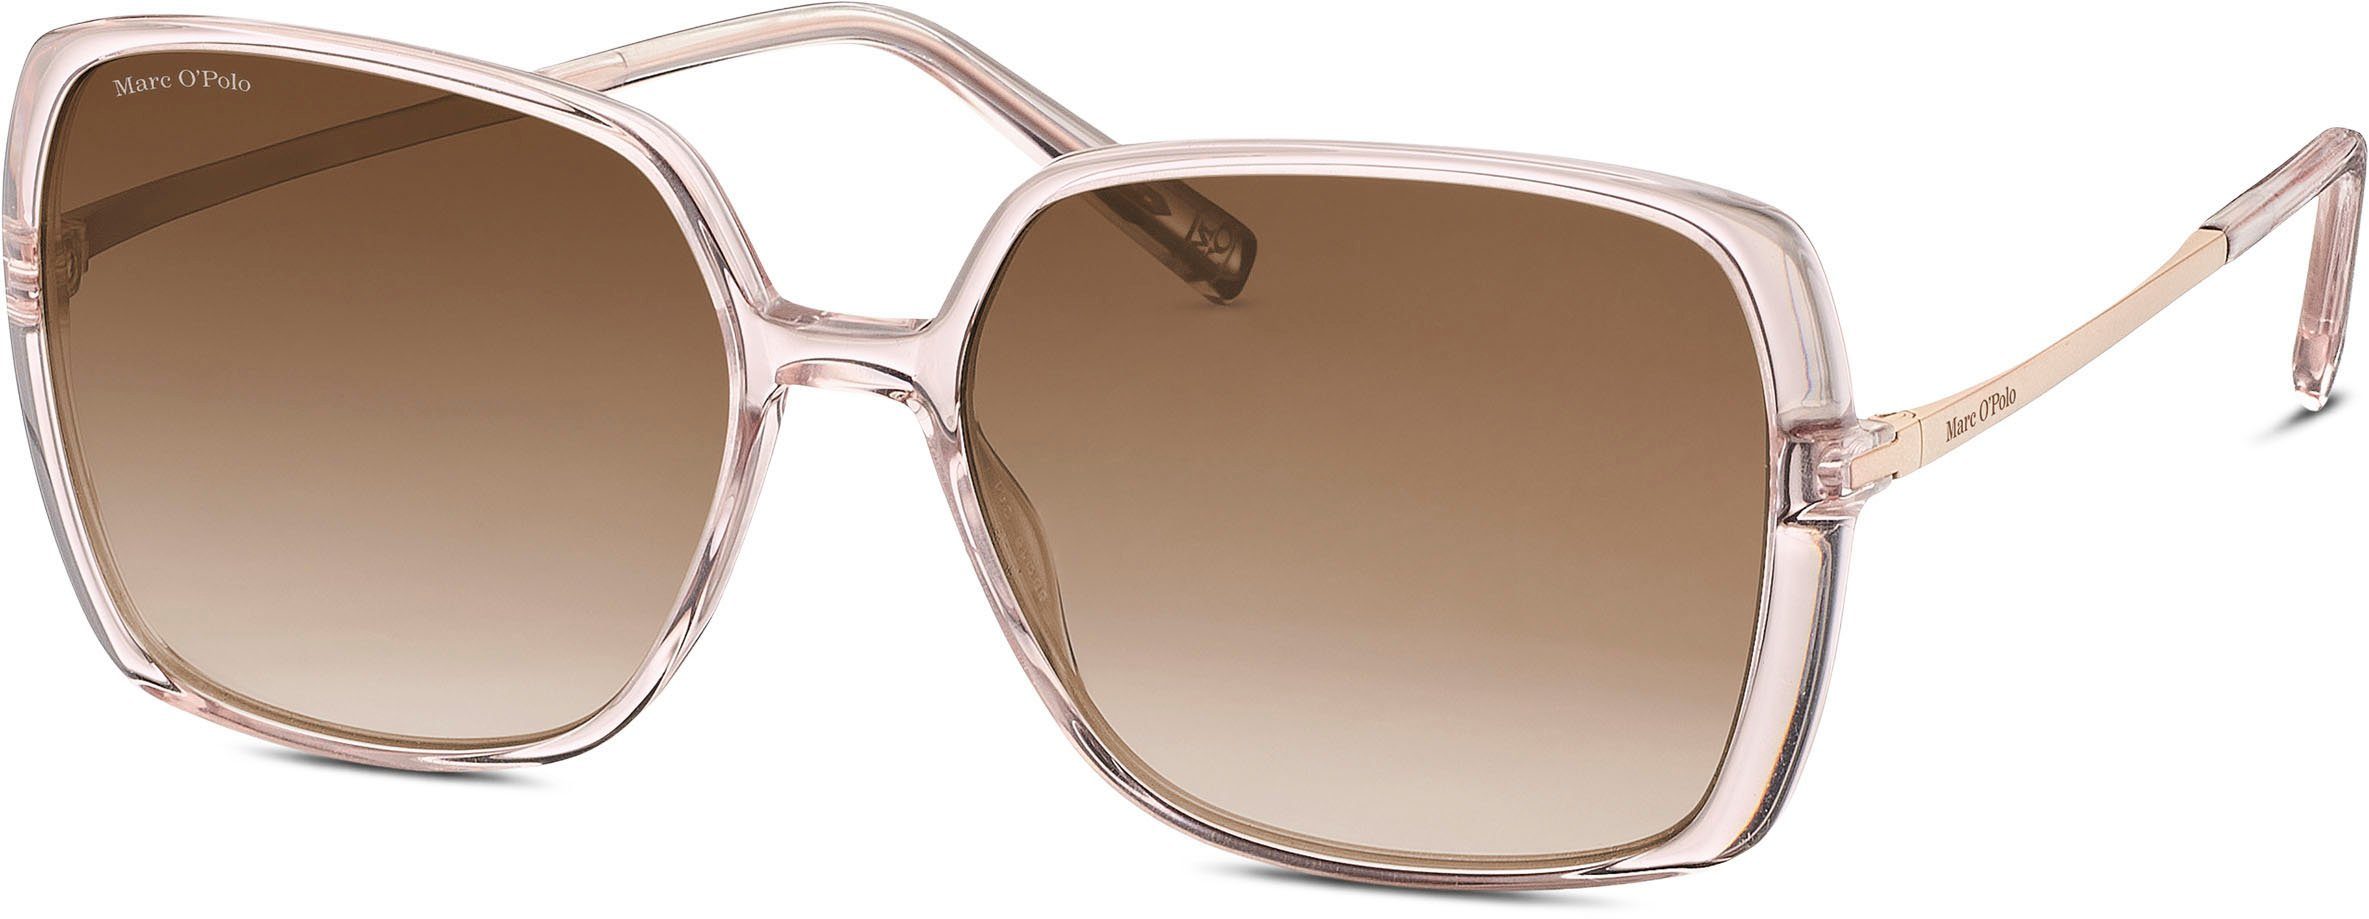 Marc O'Polo Sonnenbrille Modell 506190 Karree-From rose-braun